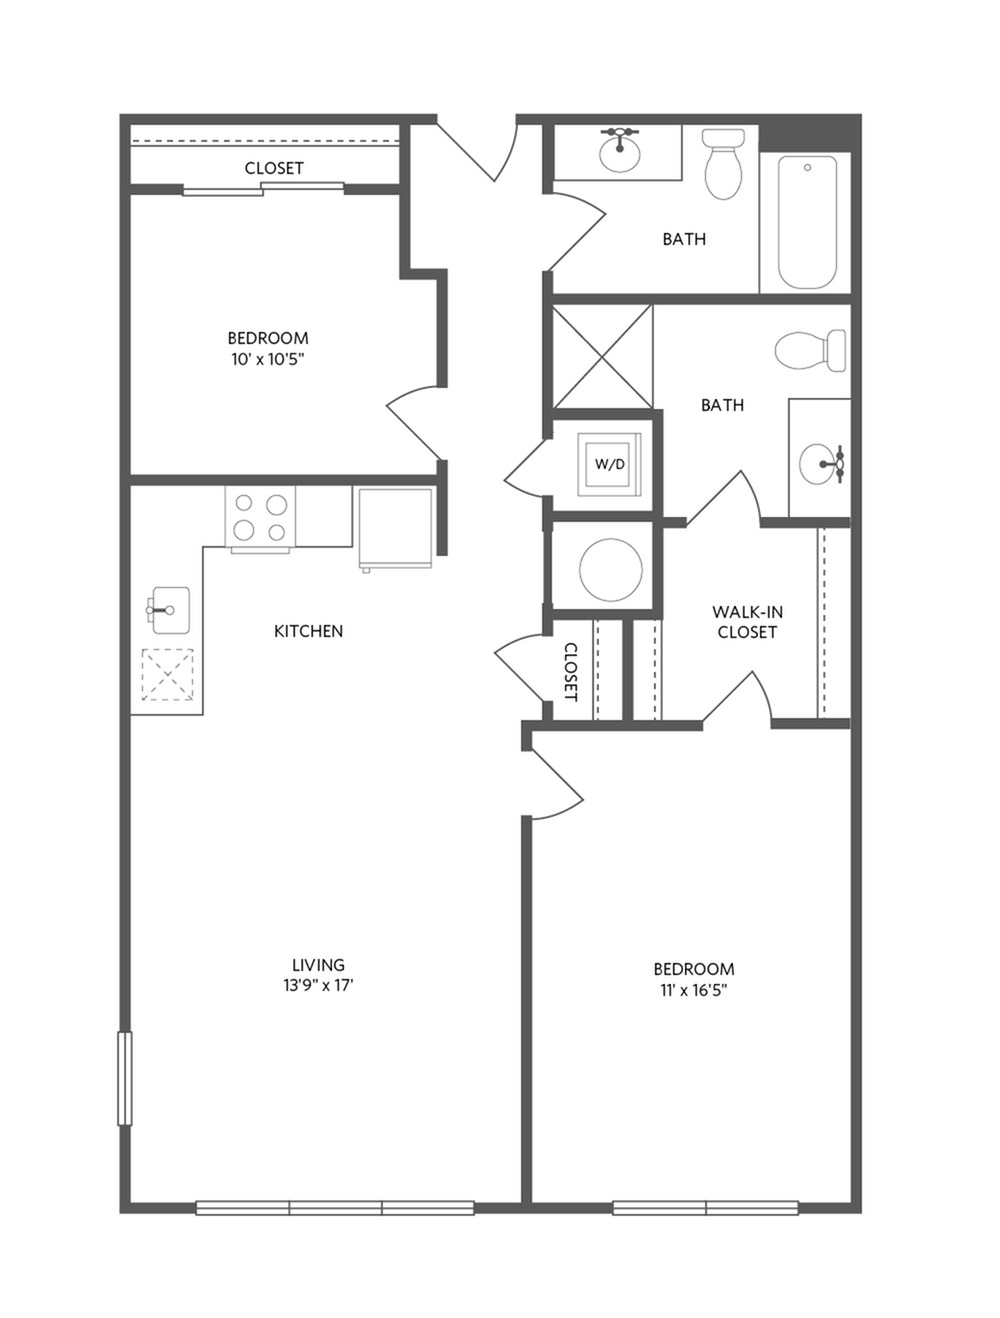 989 square foot two bedroom two bath apartment floorplan image